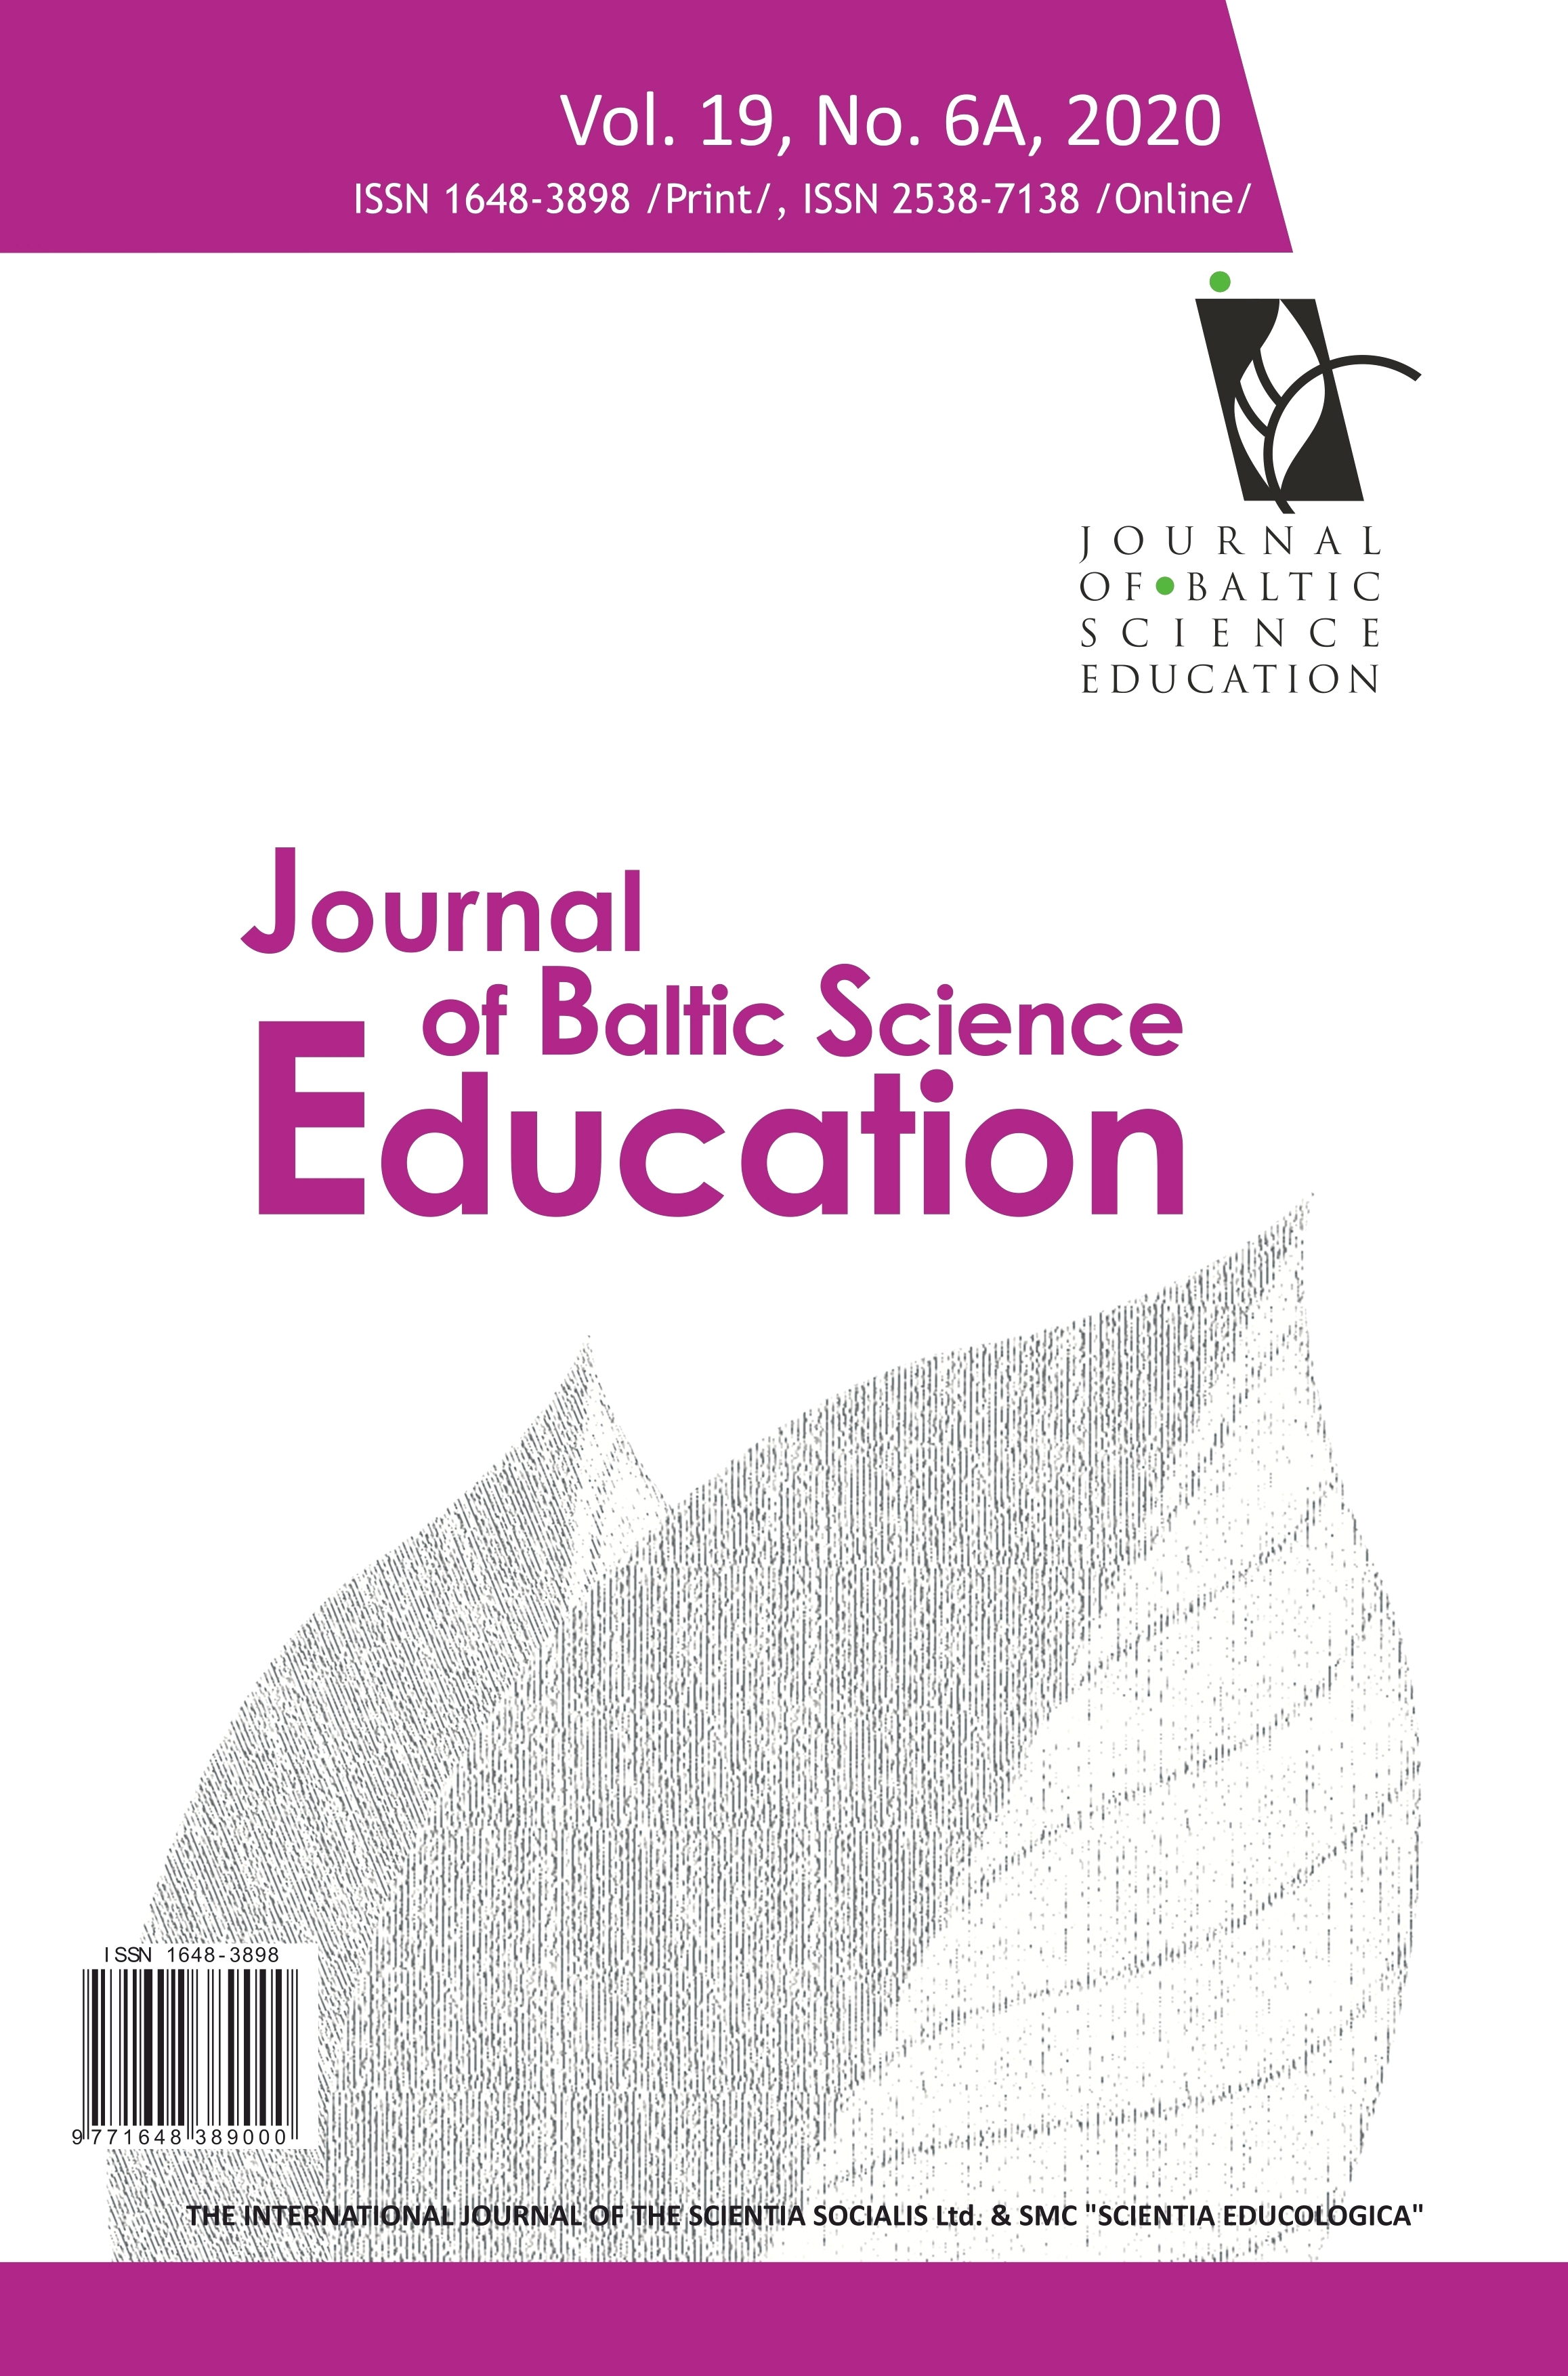 ASSESSING PRE-SERVICE TEACHERS’ RECEPTION AND ATTITUDES TOWARDS VIRTUAL LABORATORY EXPERIMENTS IN LIFE SCIENCES